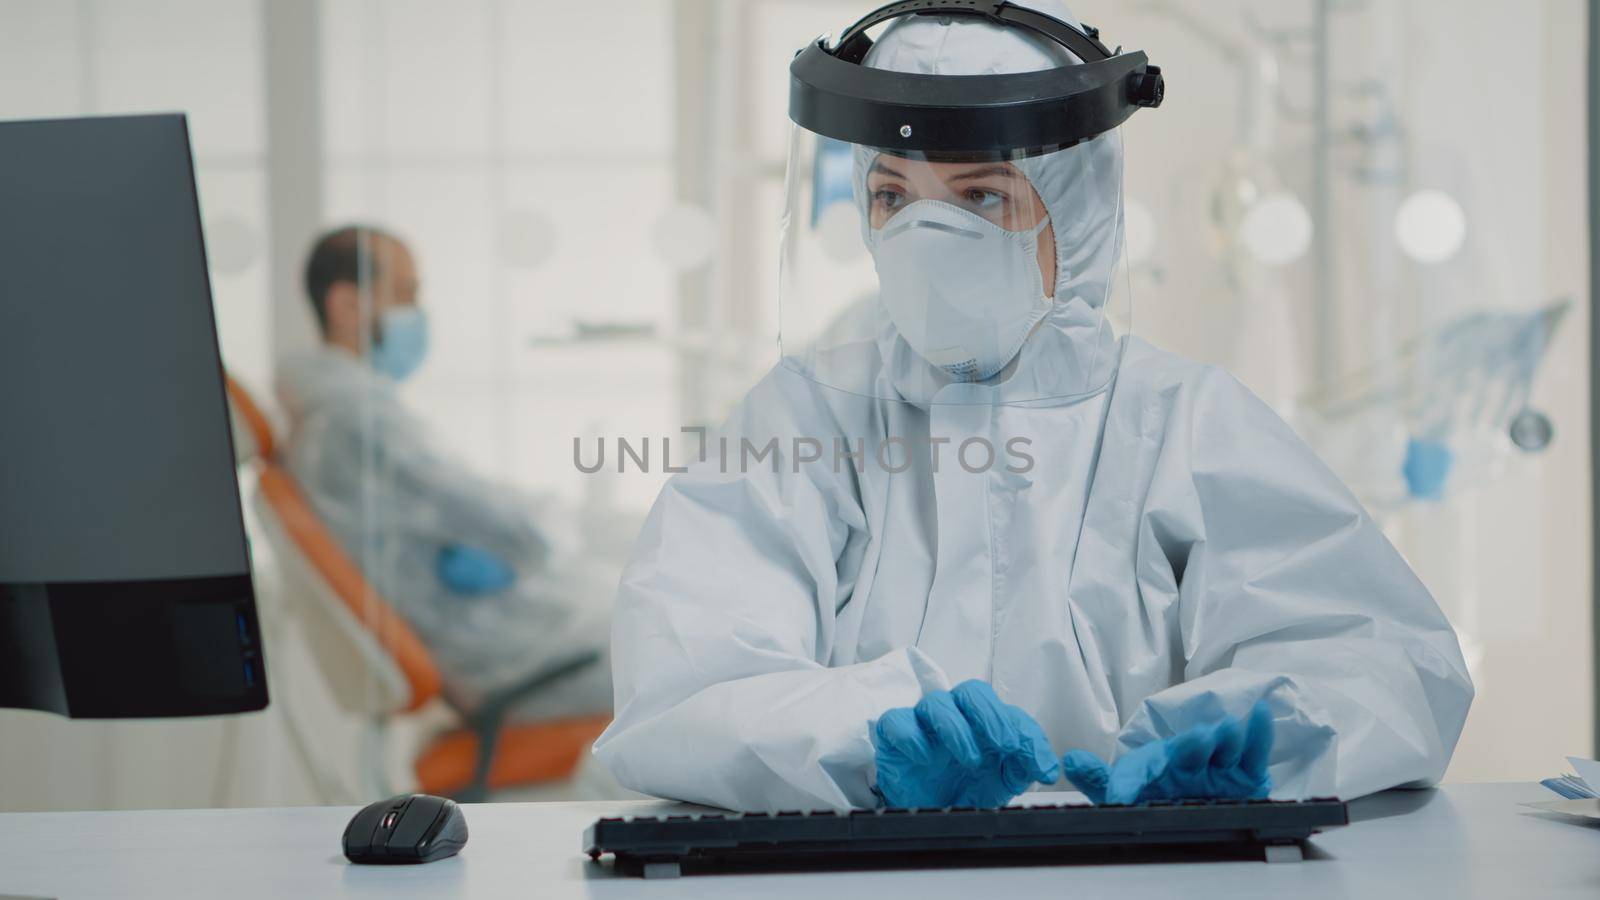 Dentistry specialist holding x ray while using computer at dental clinic desk. Caucasian nurse with ppe suit examining oral radiography scan on digital monitor for teeth healthcare